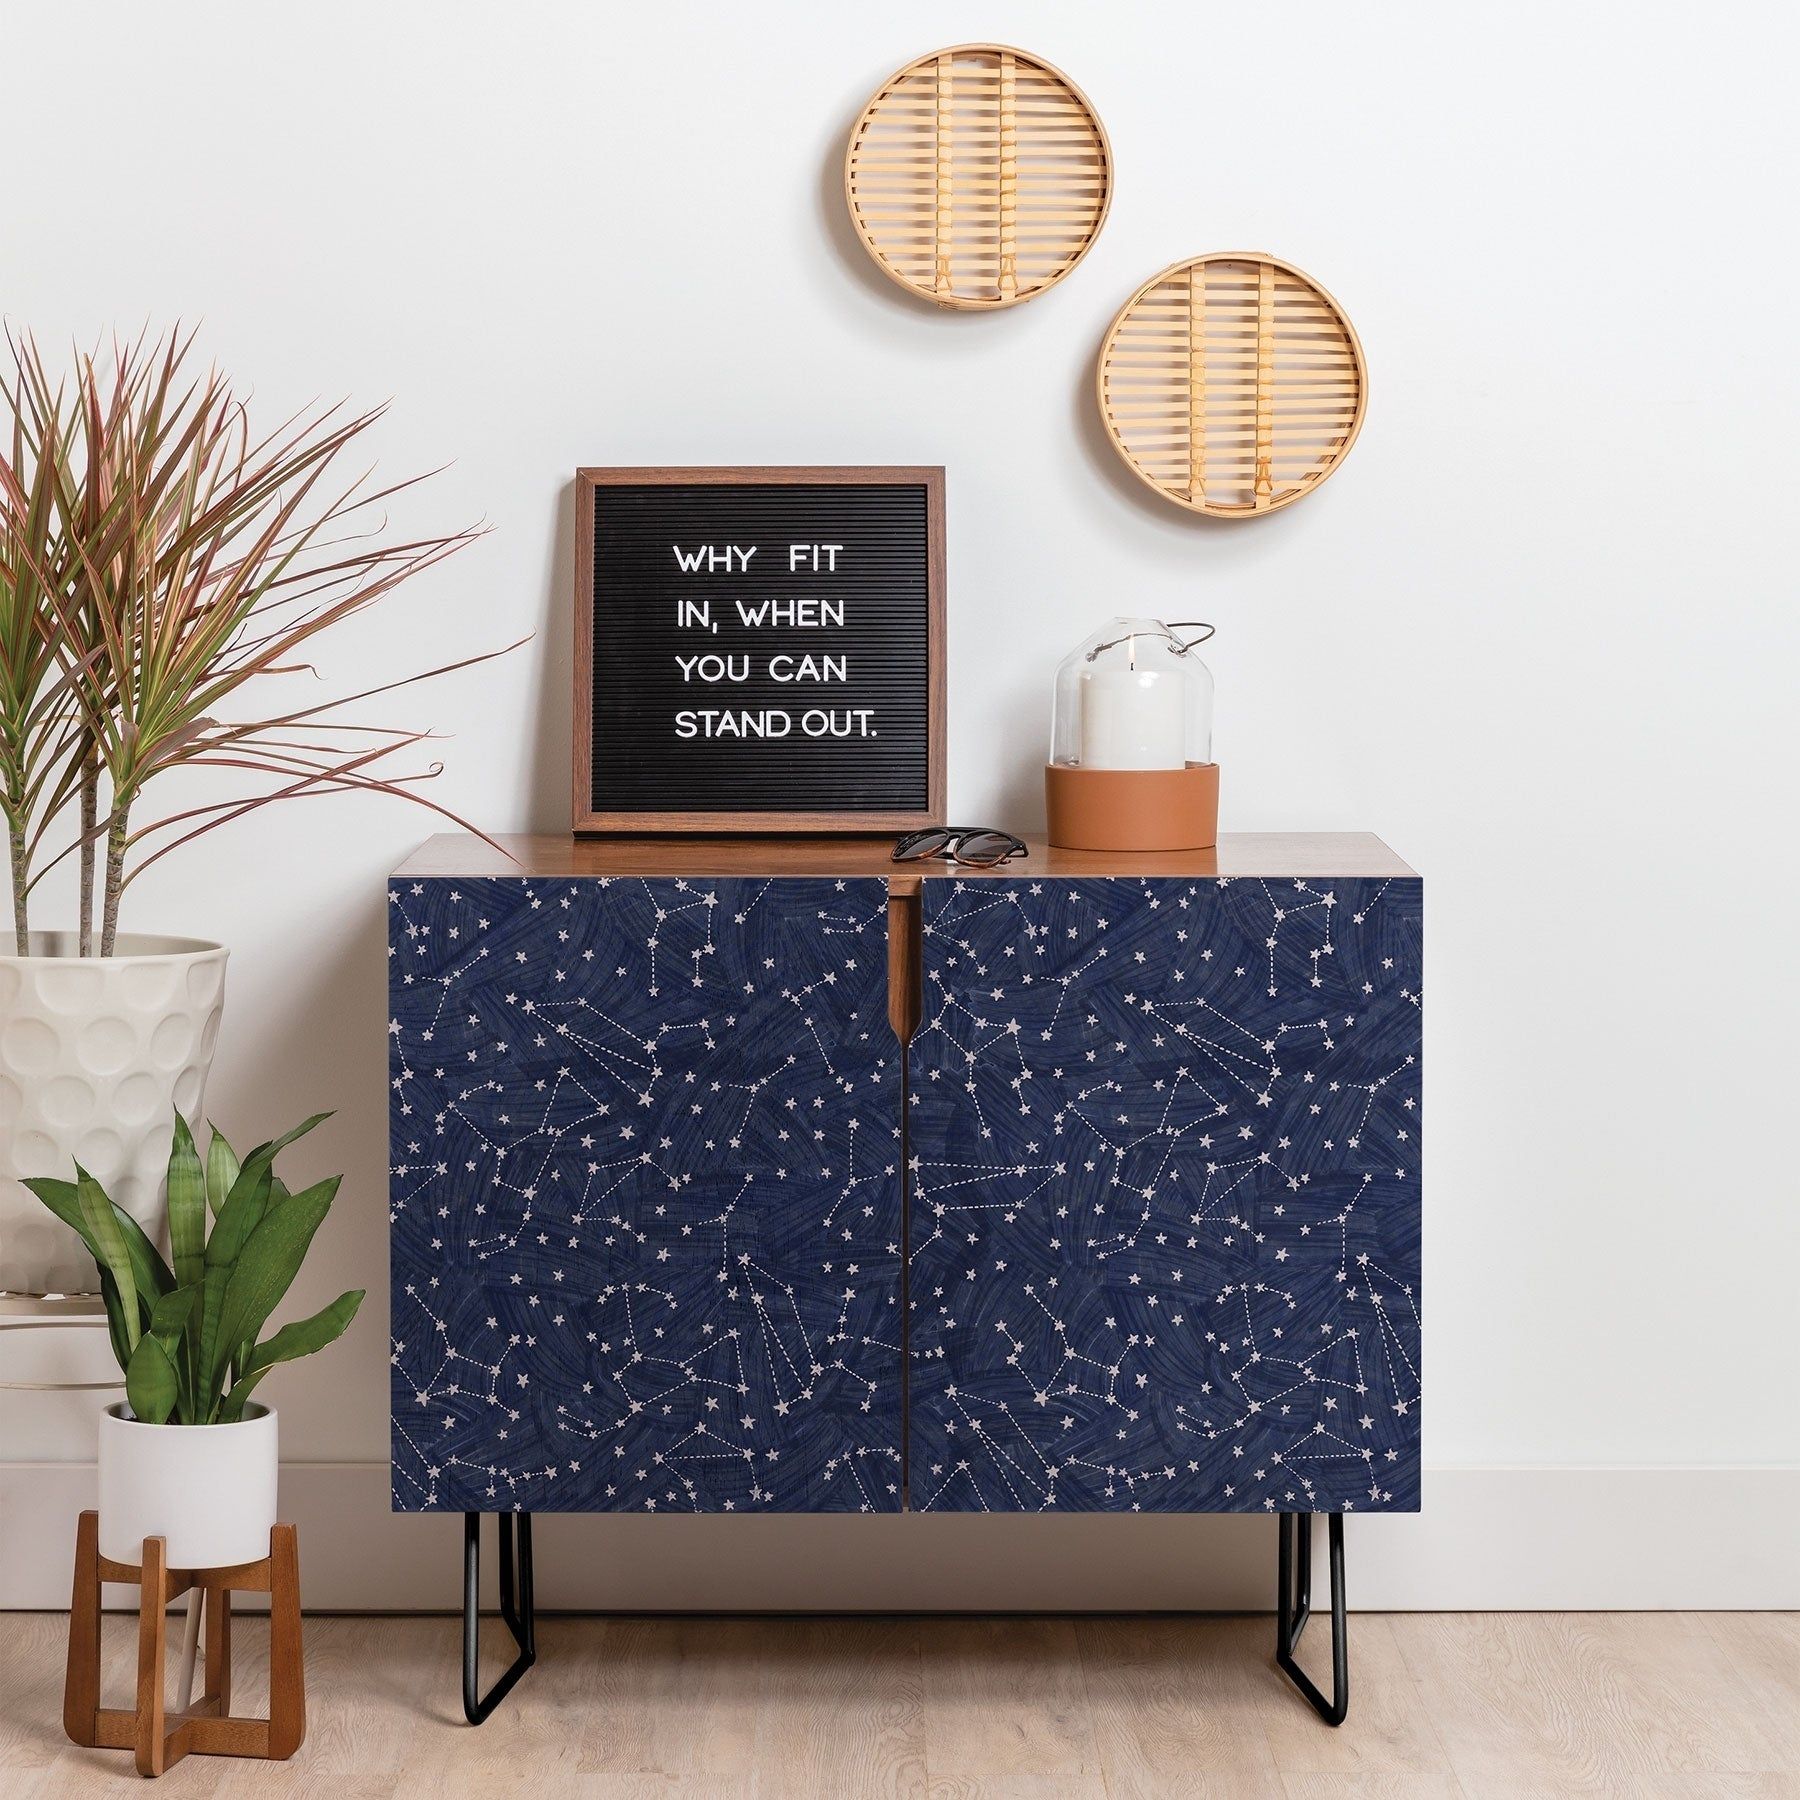 Deny Designs Nights Sky In Navy Credenza (birch Or Walnut, 2 Leg Options) Pertaining To Bluetrellis Credenzas (View 4 of 30)